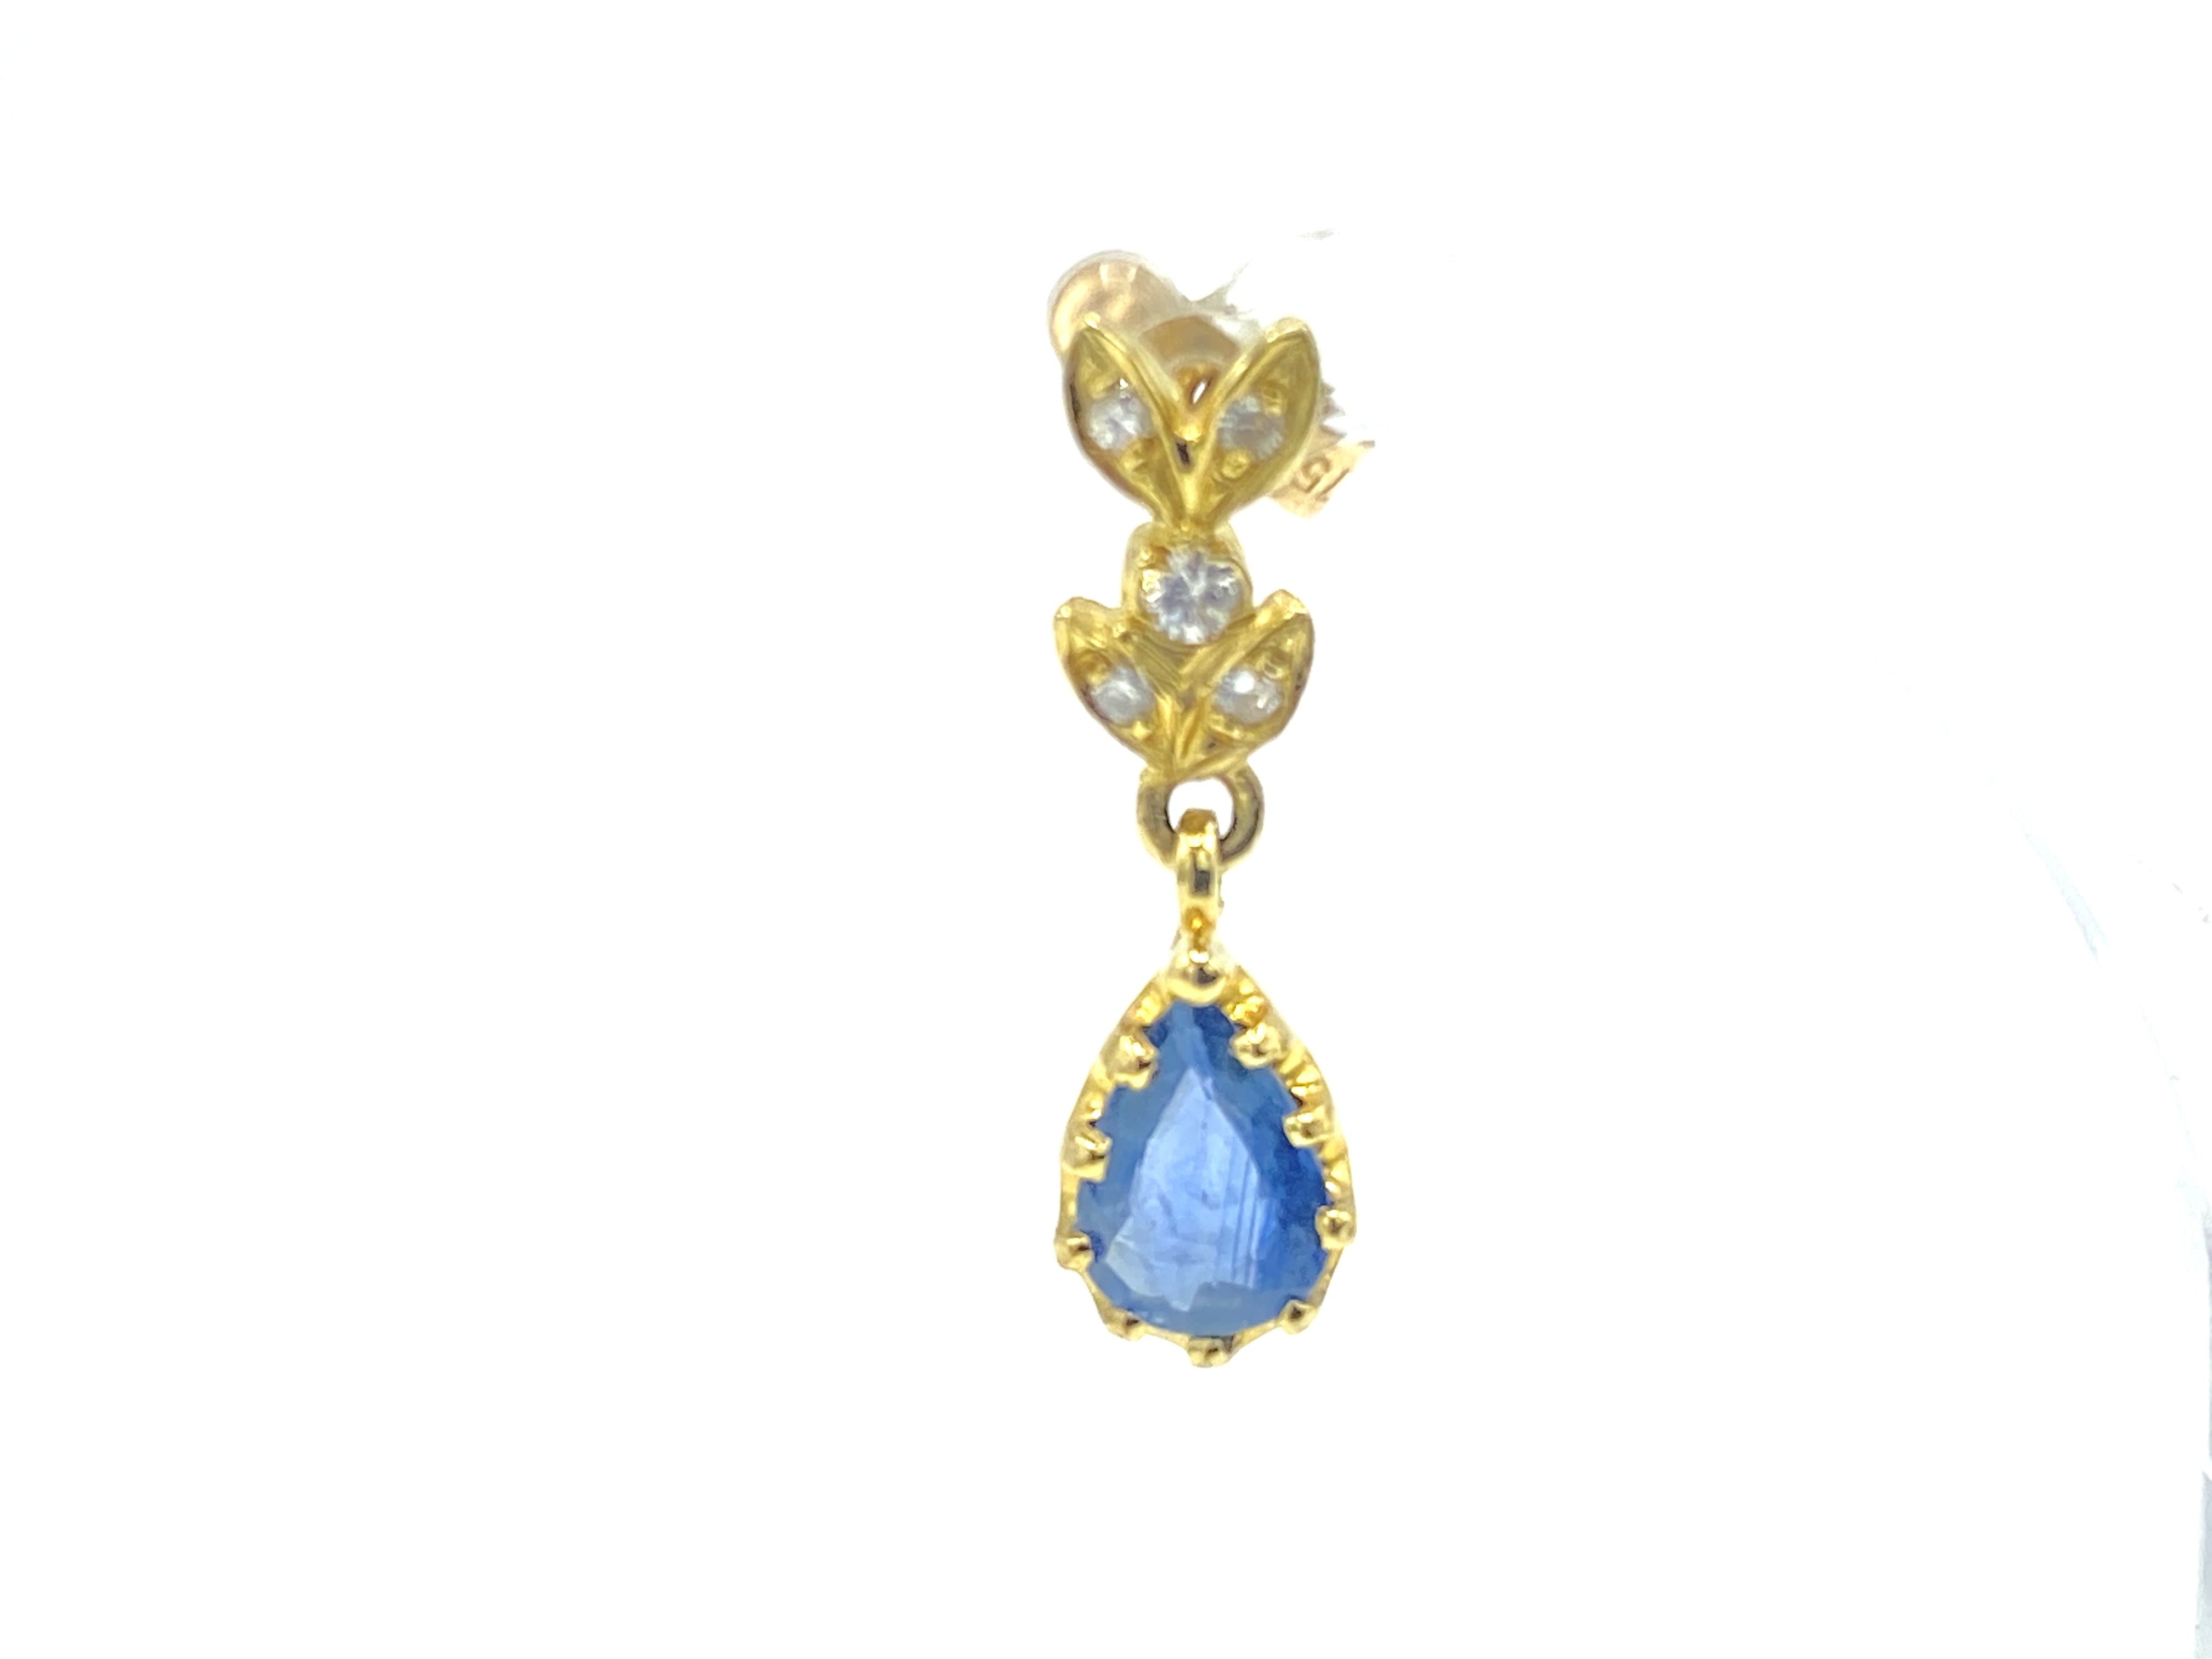 A pair of 9ct gold, diamond and sapphire drop earrings - Image 2 of 4